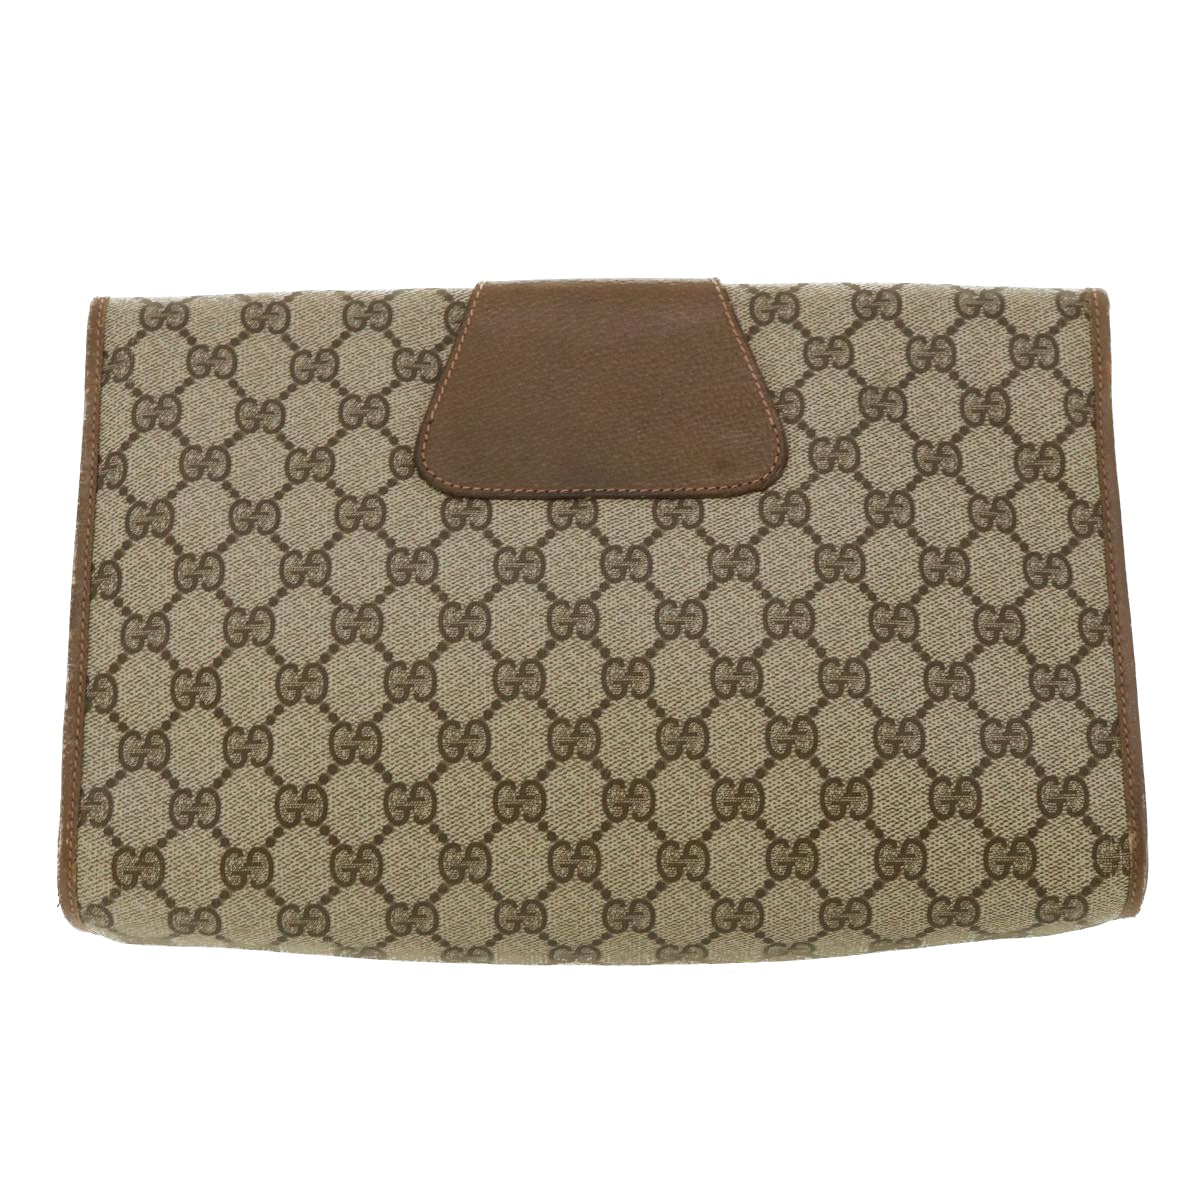 GUCCI GG Canvas Web Sherry Line Clutch Bag Beige Red Green 8901031 Auth ny173 - 0